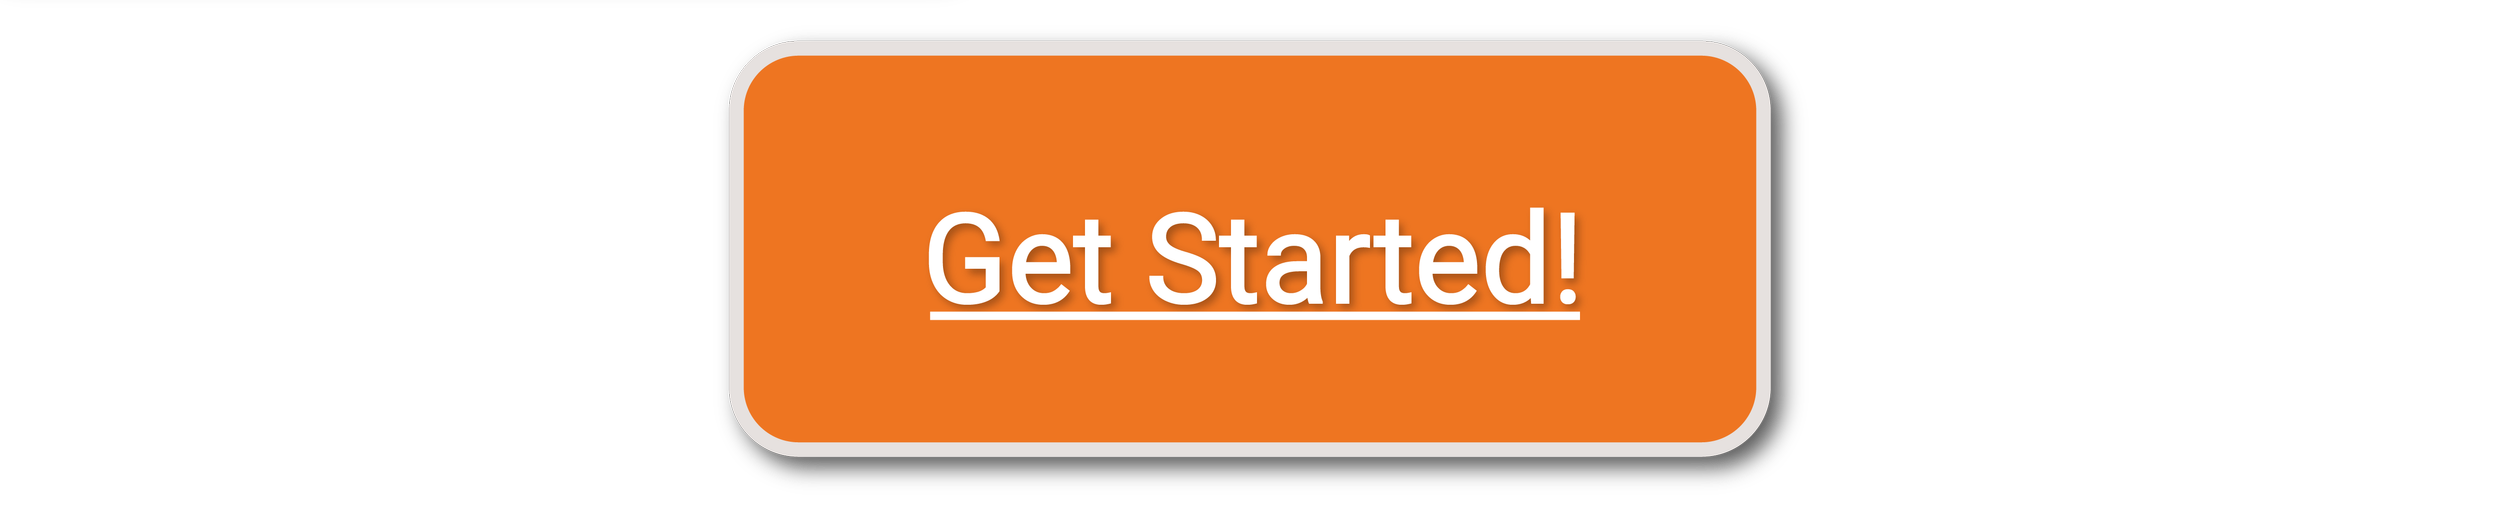 Get Started Long-33.png